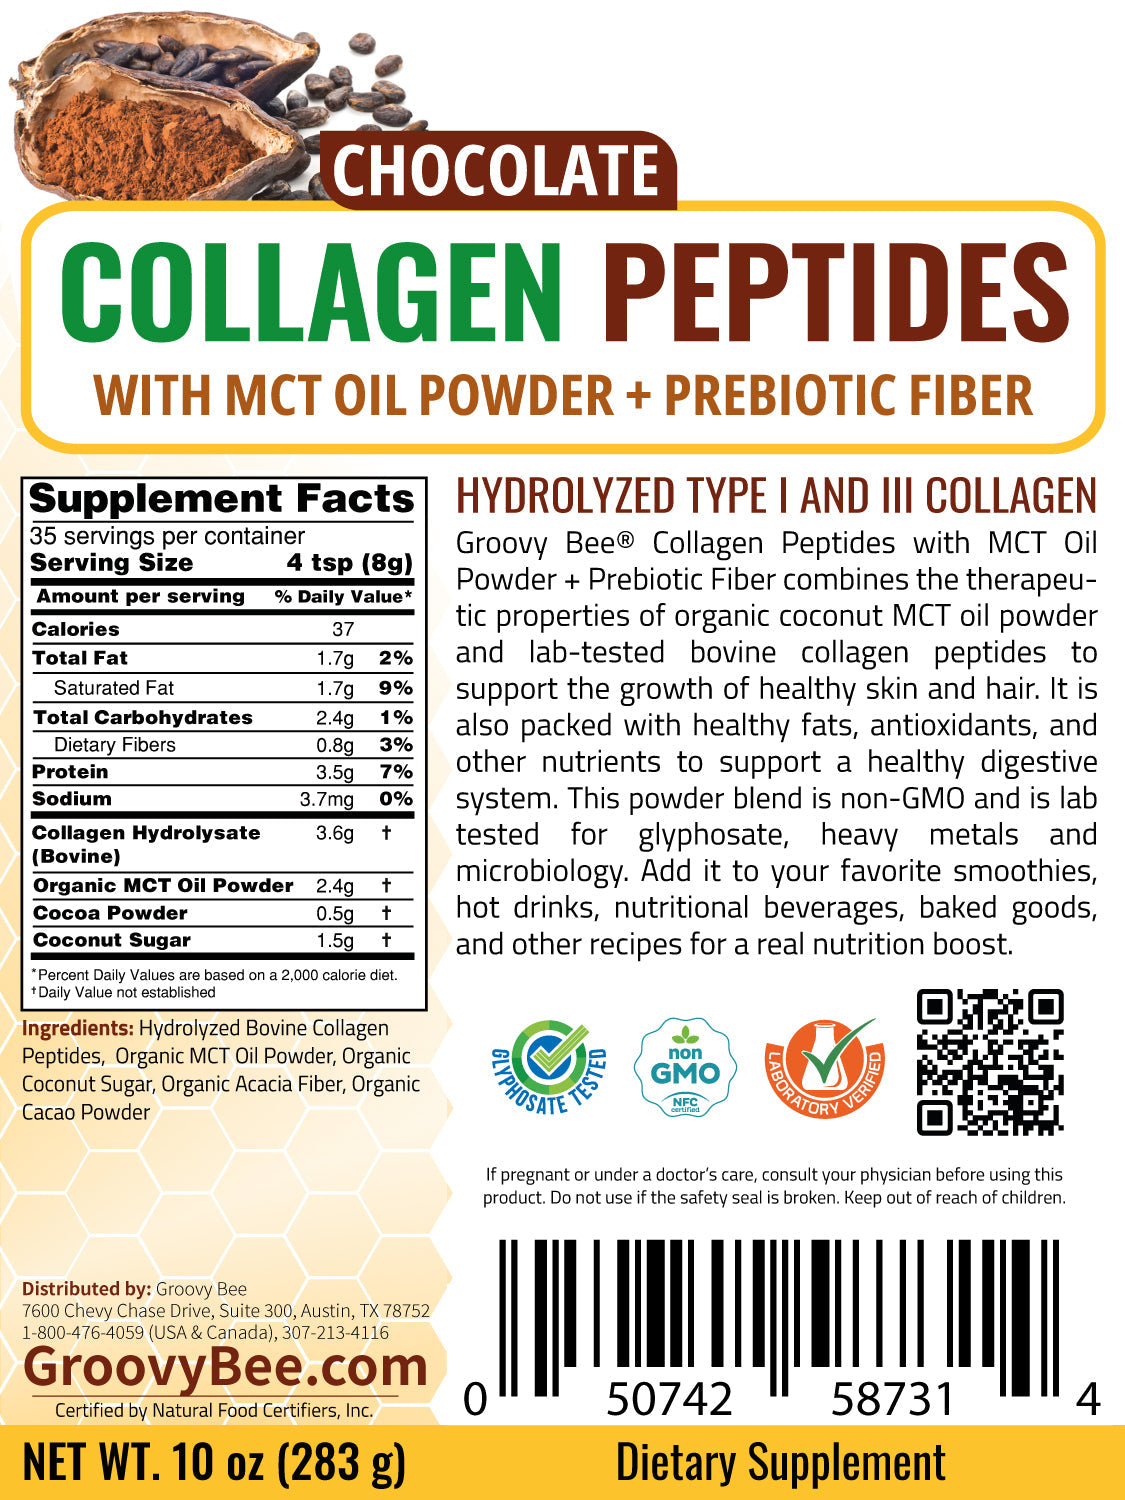 Collagen Peptides + MCT with Prebiotic Fiber - Chocolate 10 oz (283g) (6-Pack)